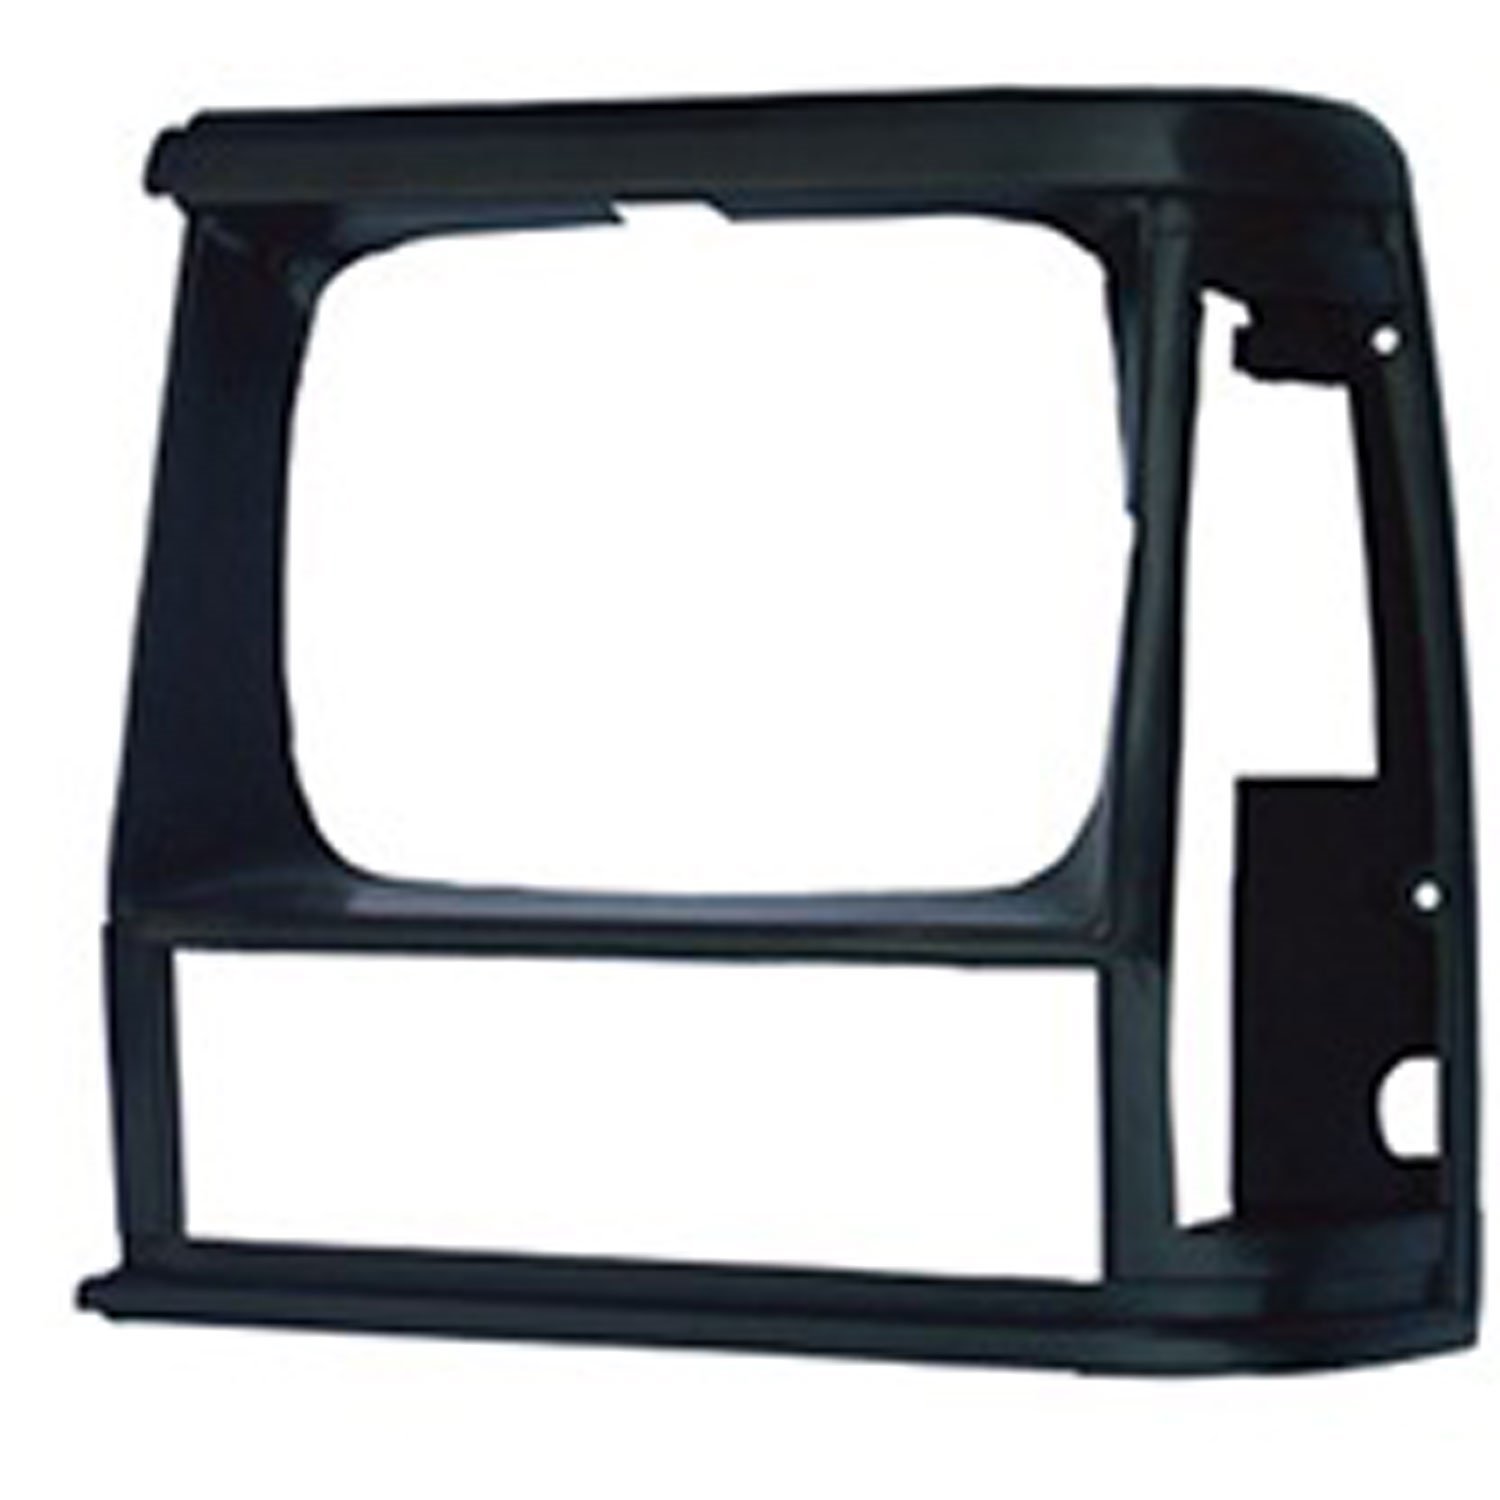 This Gray headlight bezel from Omix-ADA fits the